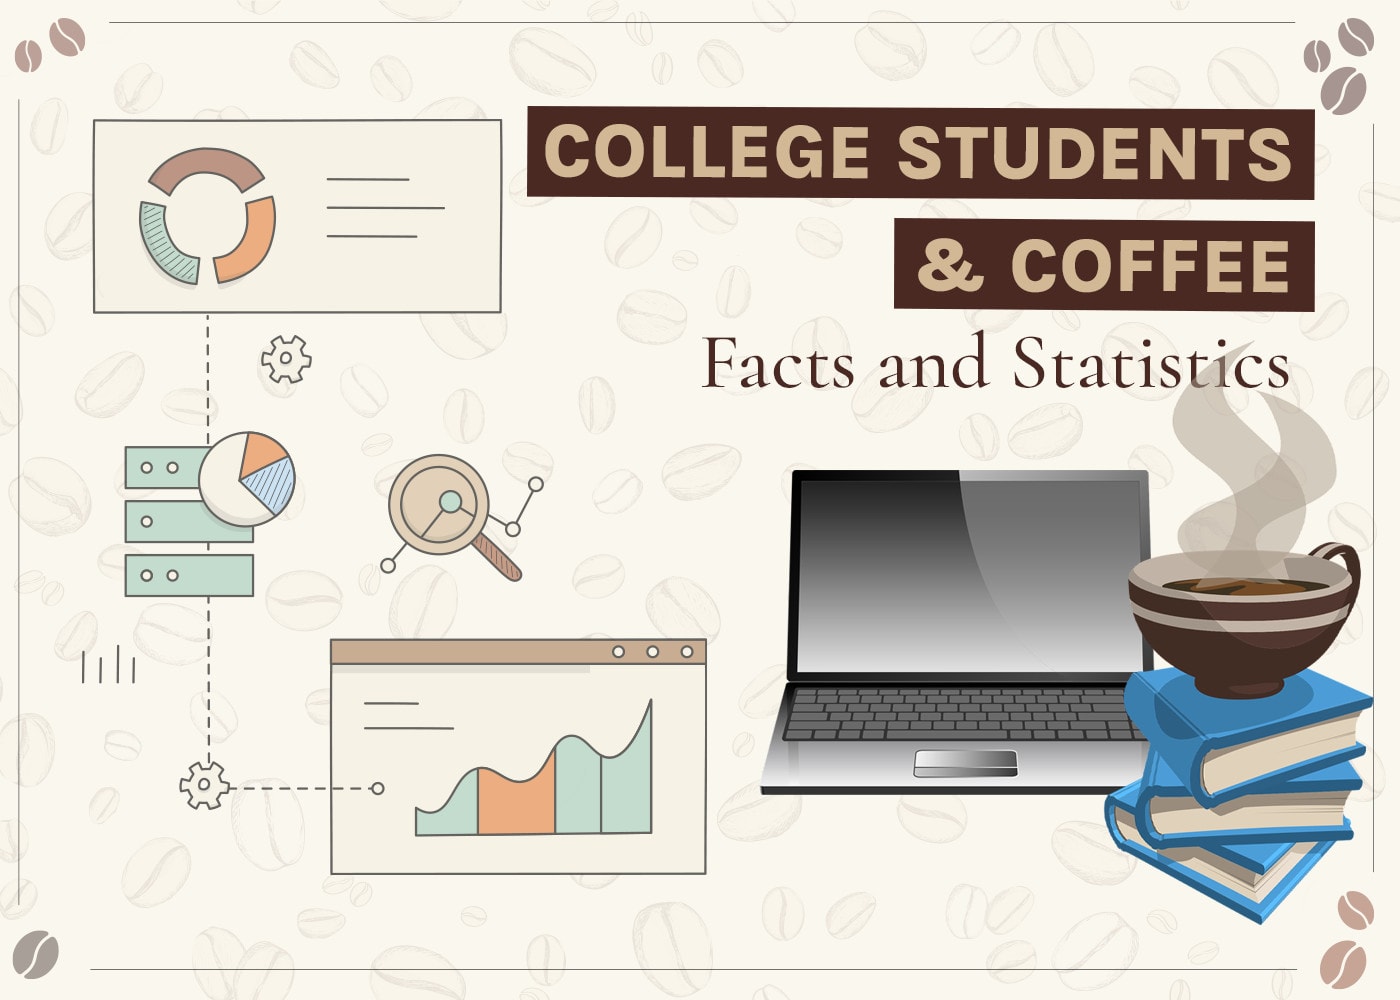 College Students and Coffee